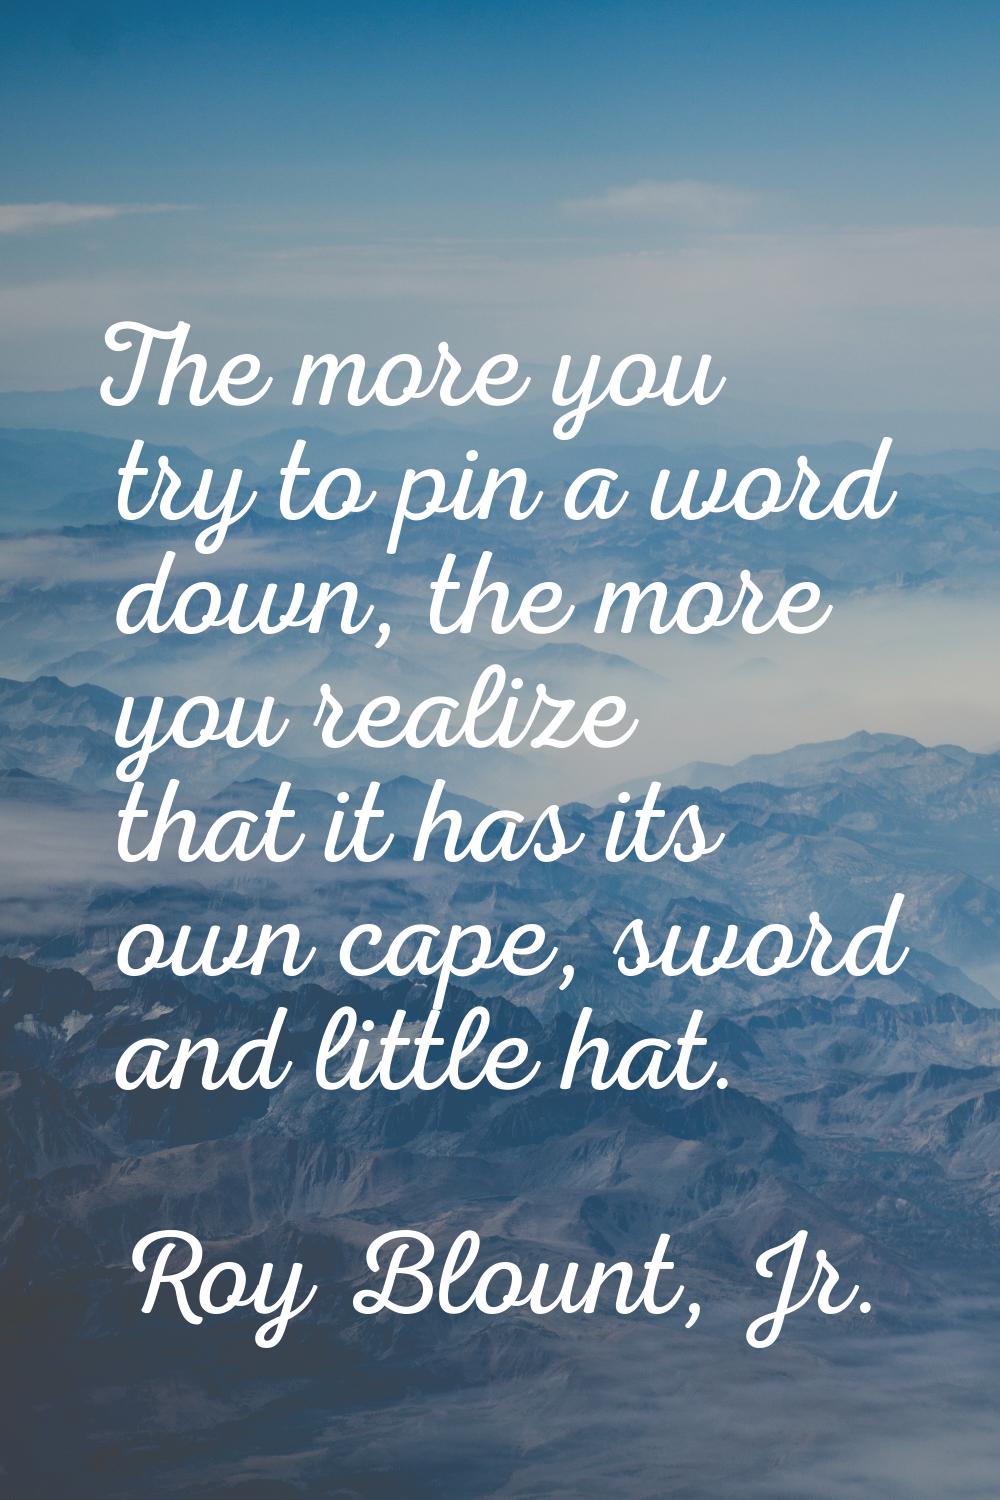 The more you try to pin a word down, the more you realize that it has its own cape, sword and littl